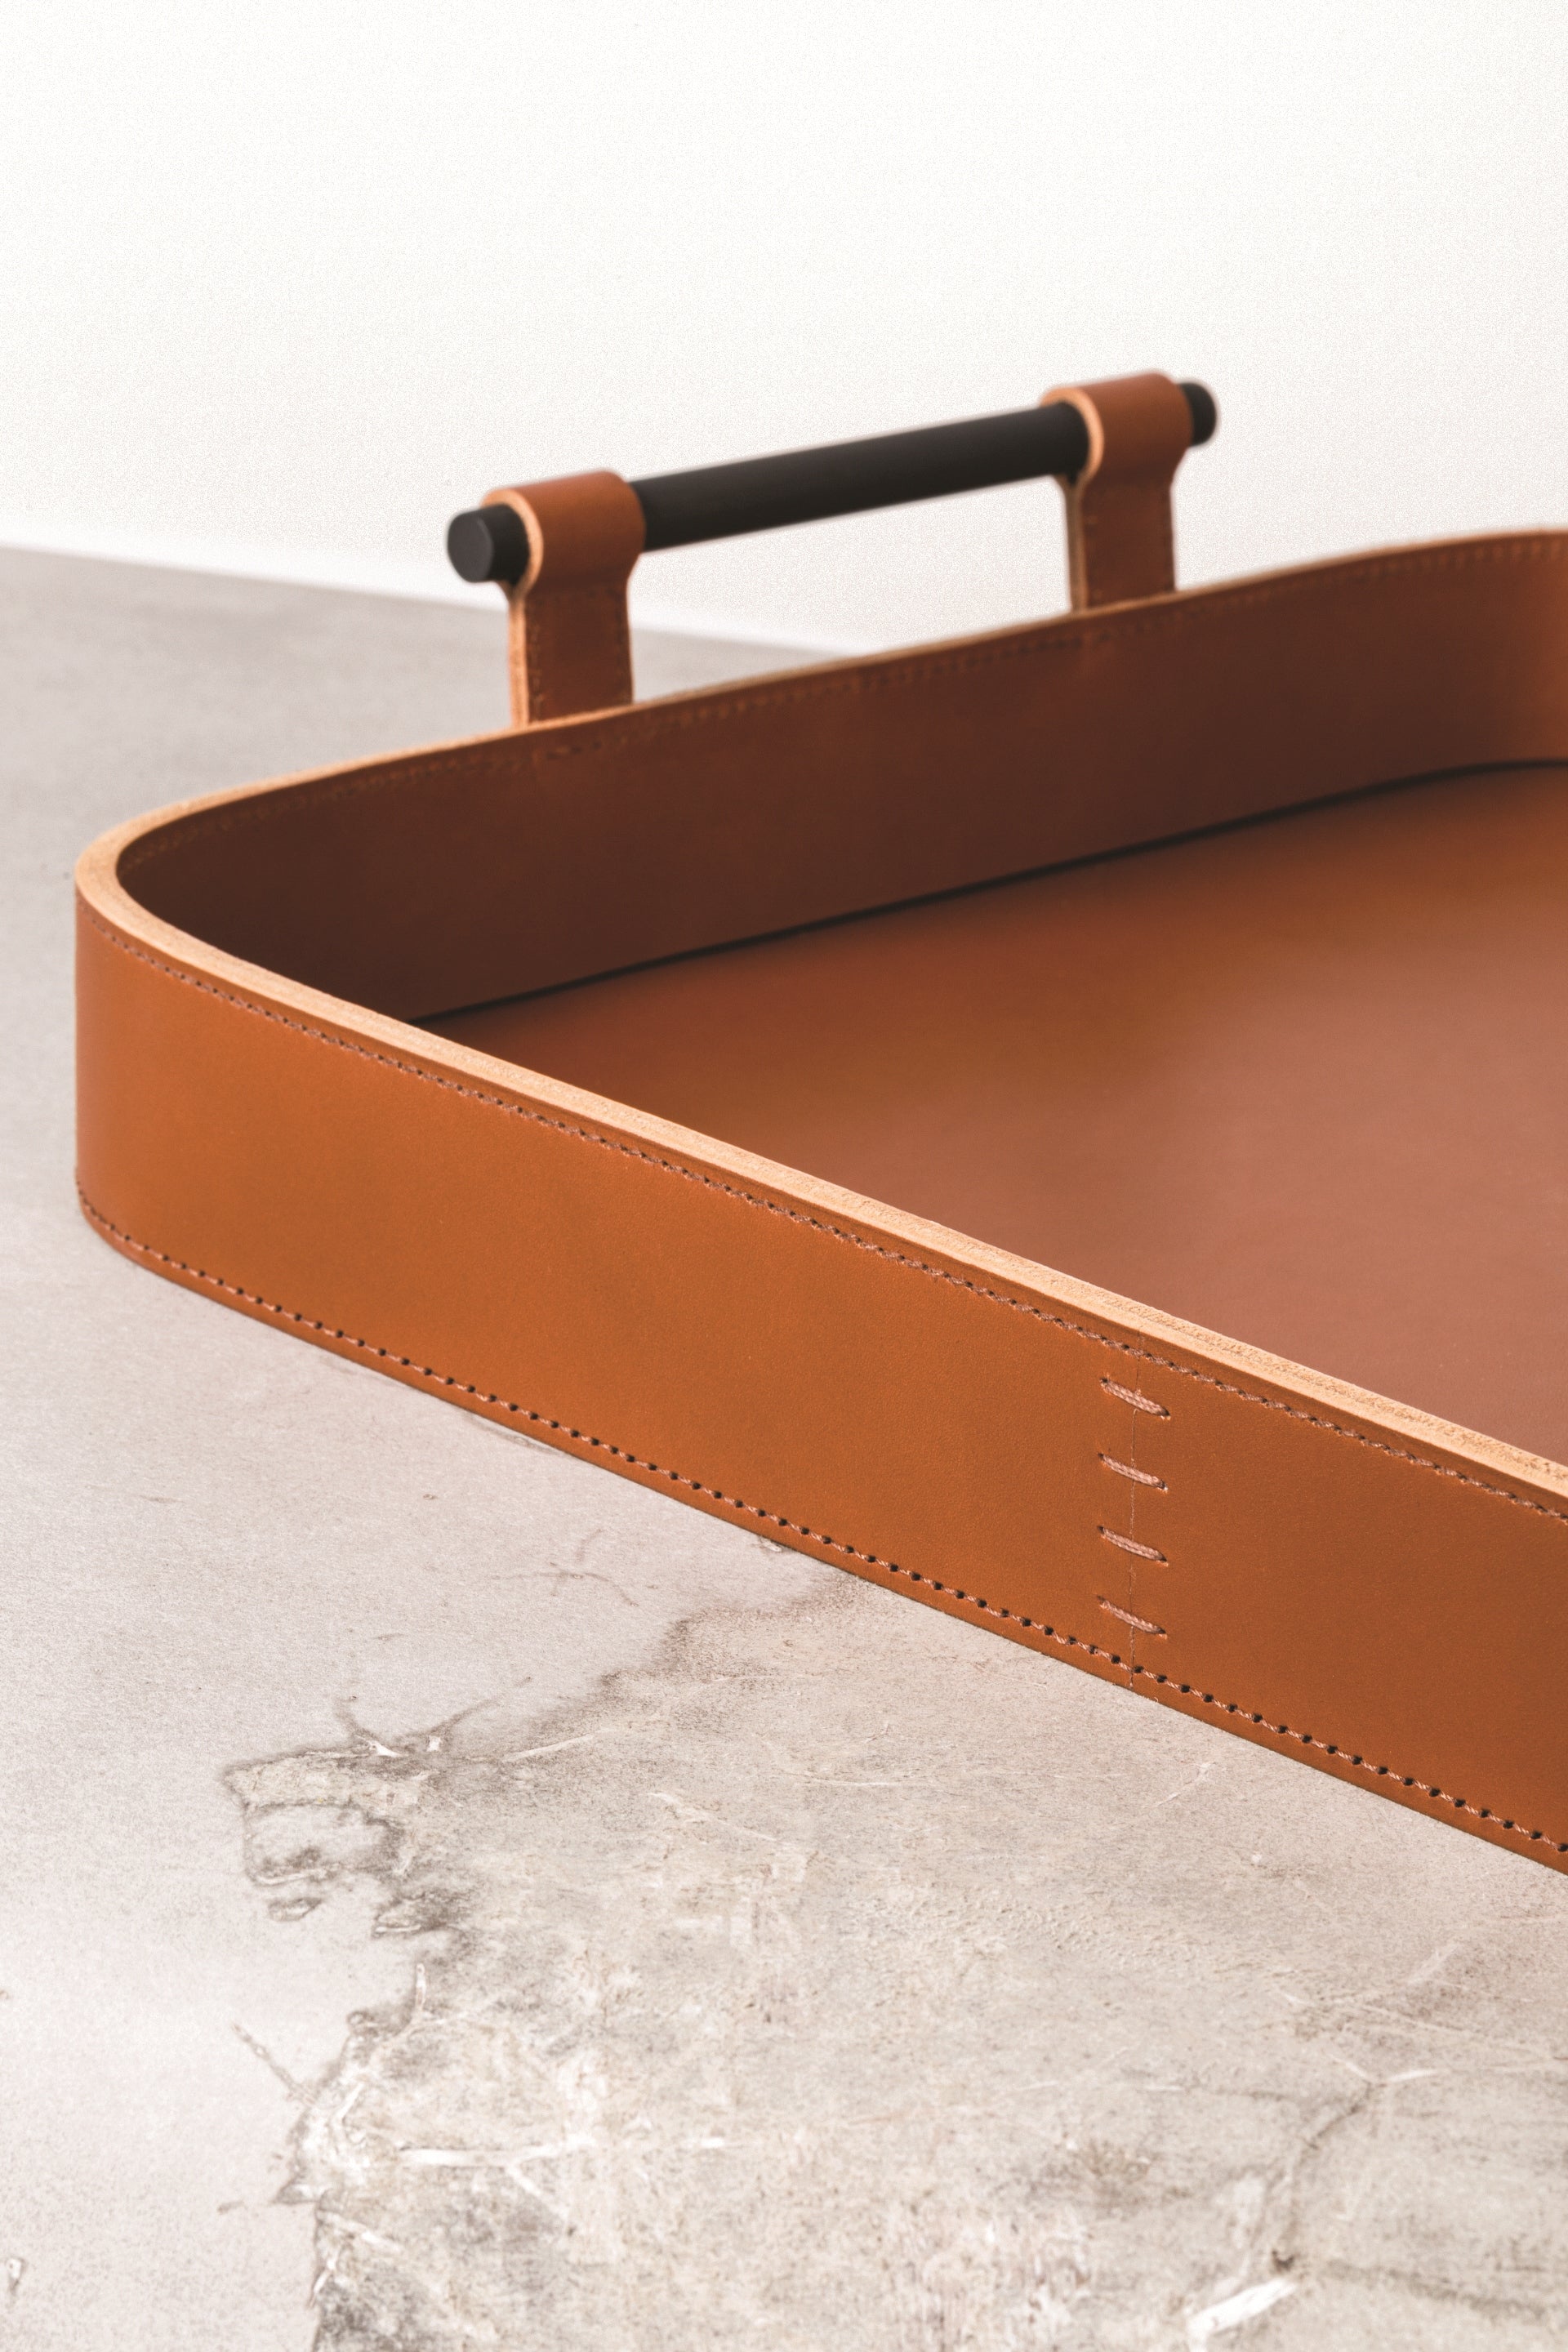 Rabitti 1969 Portofino Rectangular Saddle Leather Tray with Bronze Handles | Elegant and Functional Tray | Crafted with High-Quality Saddle Leather | Bronze Handles for a Touch of Luxury | Explore a Range of Luxury Home Accessories at 2Jour Concierge, #1 luxury high-end gift & lifestyle shop